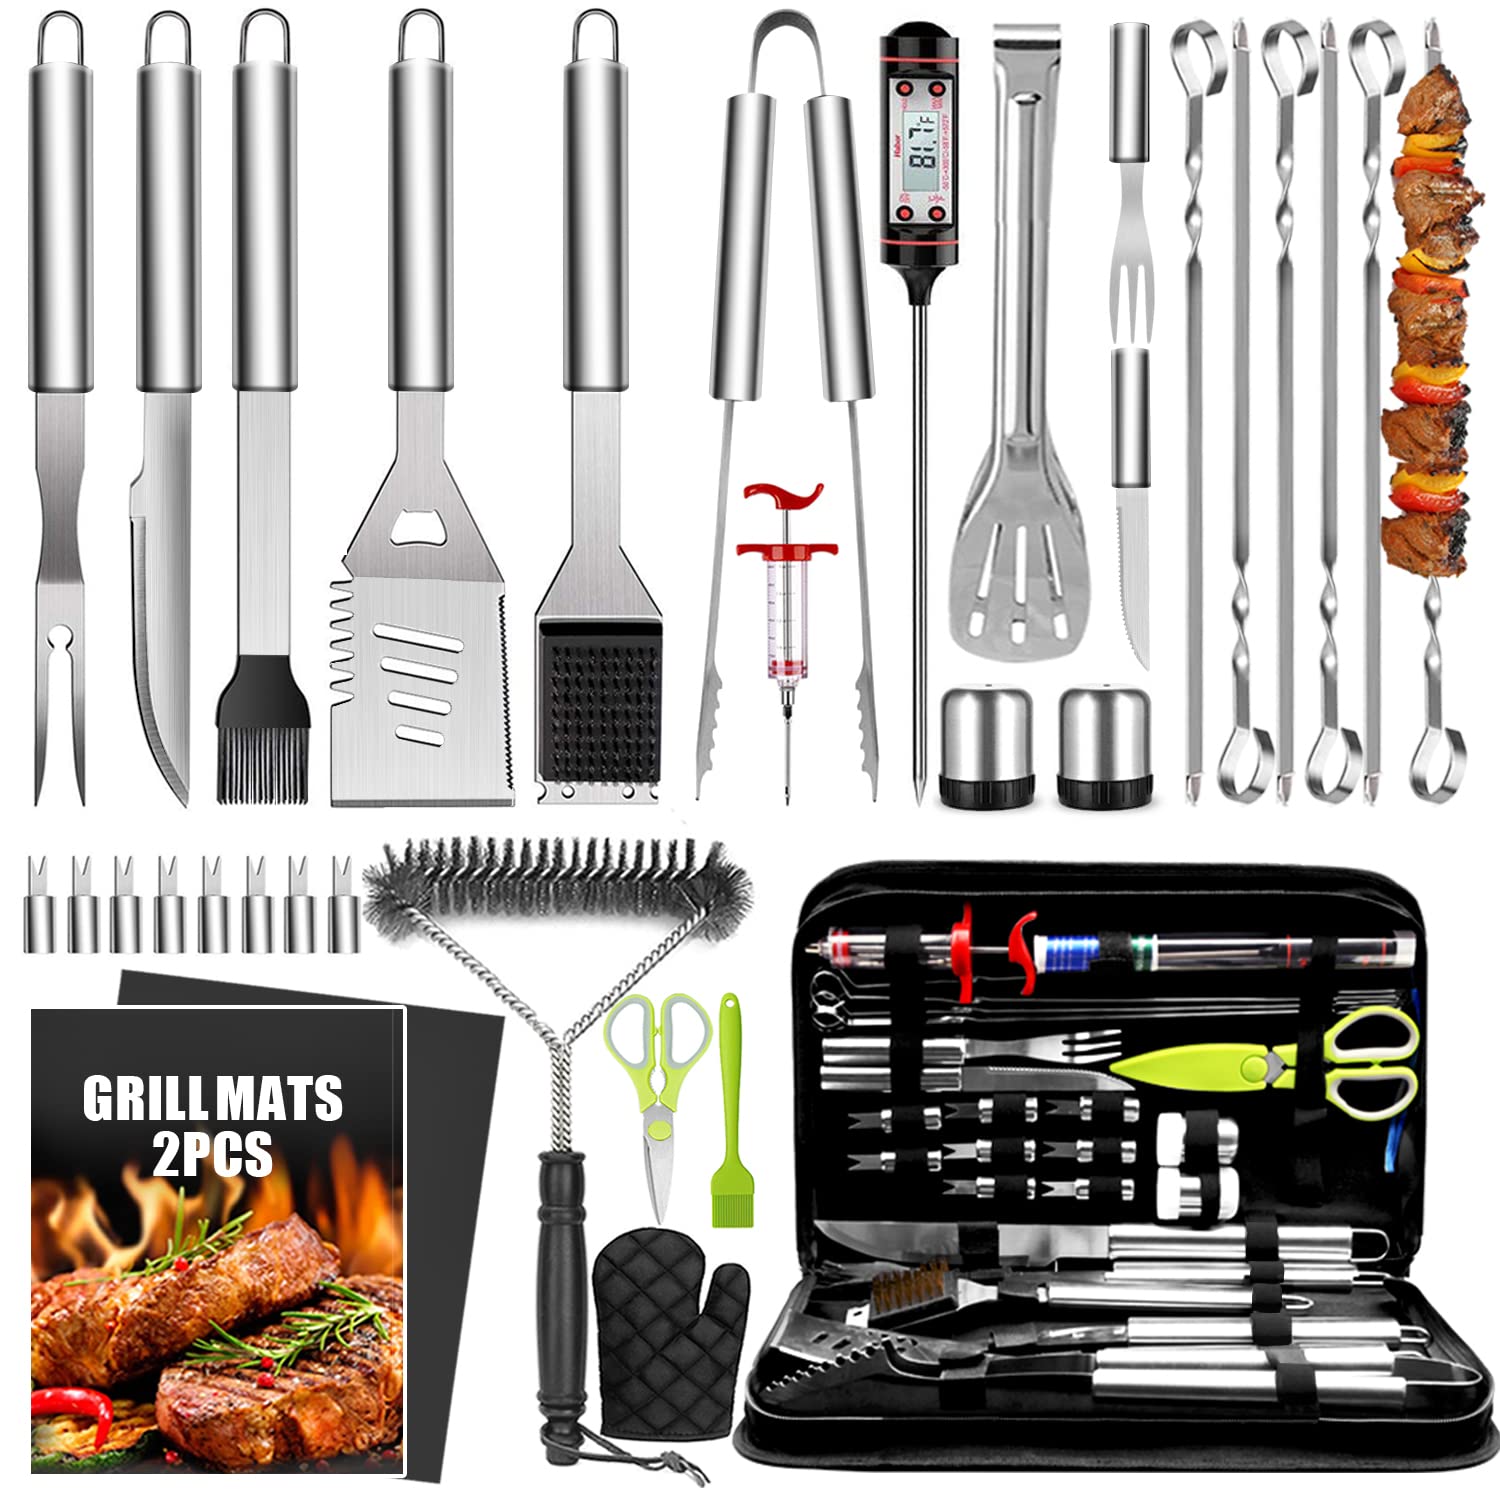 34 Pcs Grill Accessories Grilling Gifts for Men, 16 Inches Heavy Duty BBQ Accessories, Stainless Steel Grill Tools, Grill Mats for Backyard, BBQ Gifts Set - image 1 of 7